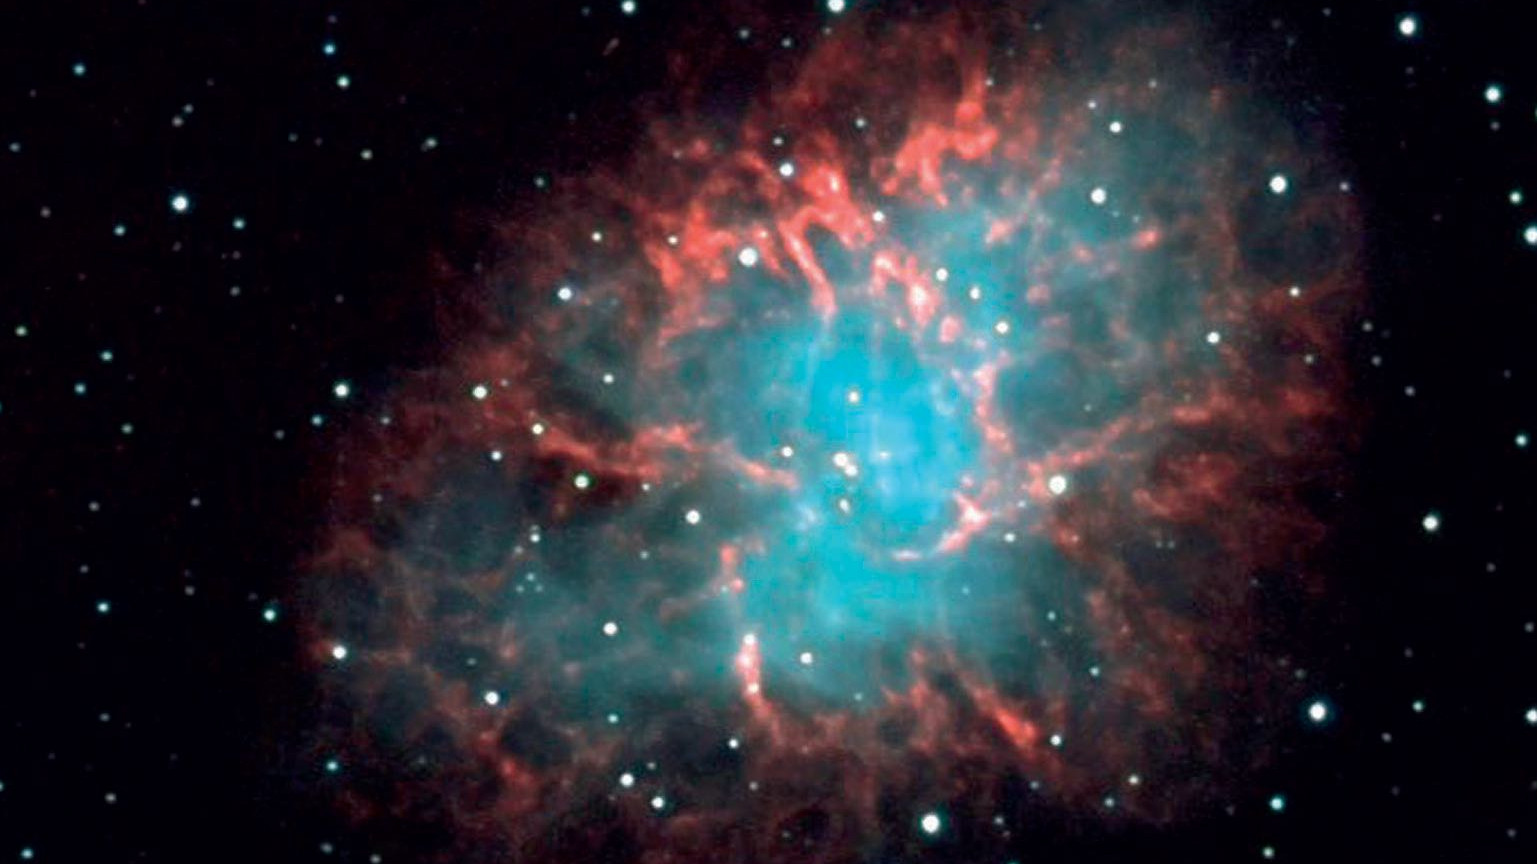 Messier 1 – the famous Crab Nebula